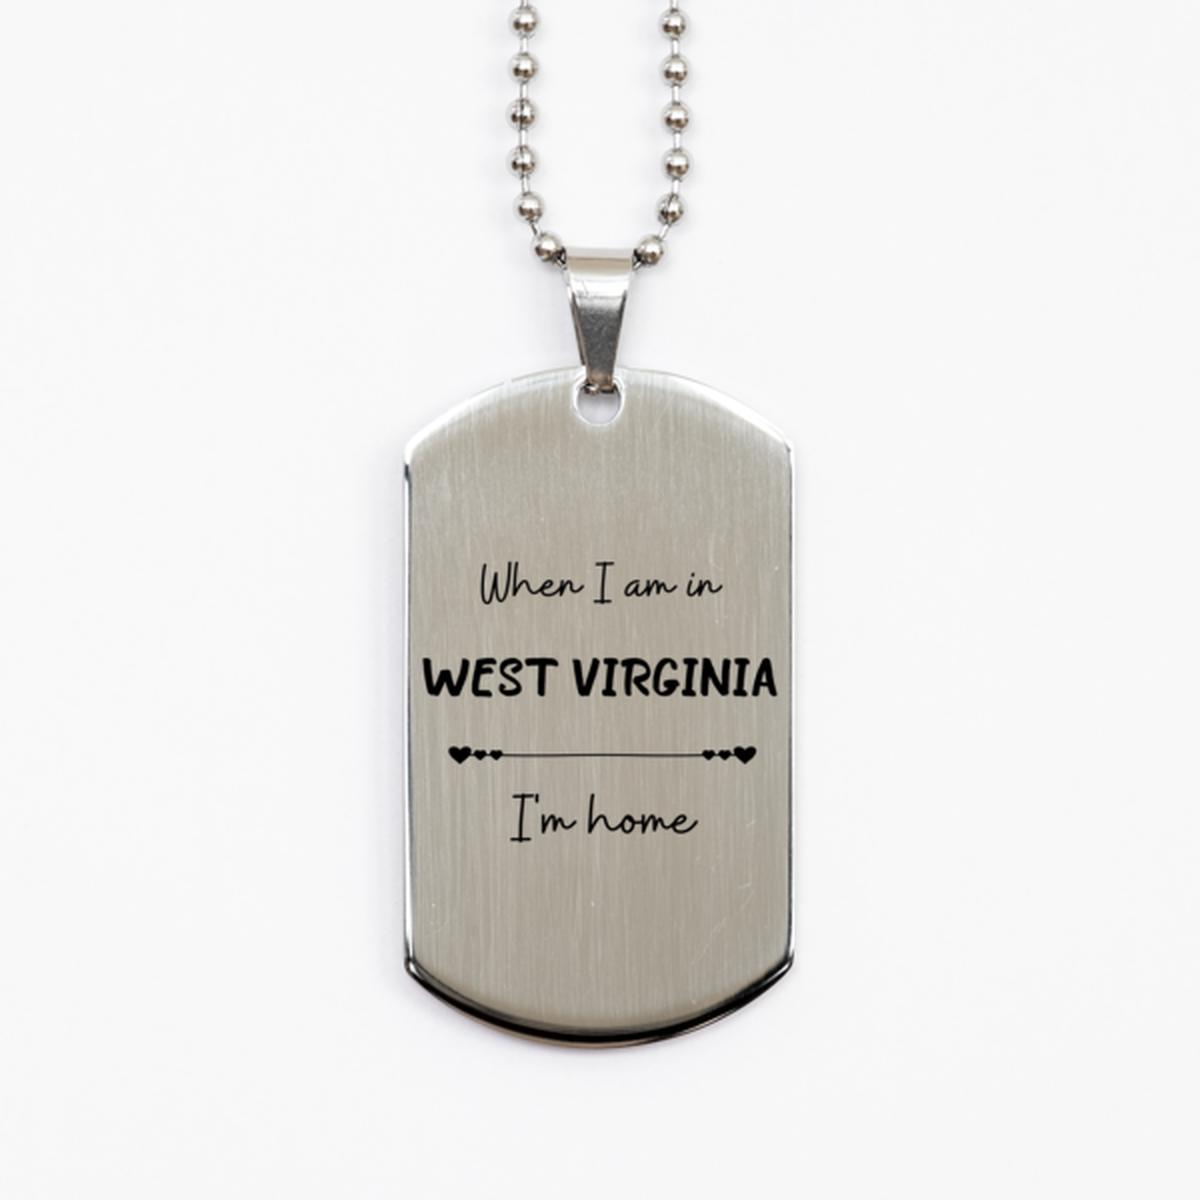 When I am in West Virginia I'm home Silver Dog Tag, Cheap Gifts For West Virginia, State West Virginia Birthday Gifts for Friends Coworker